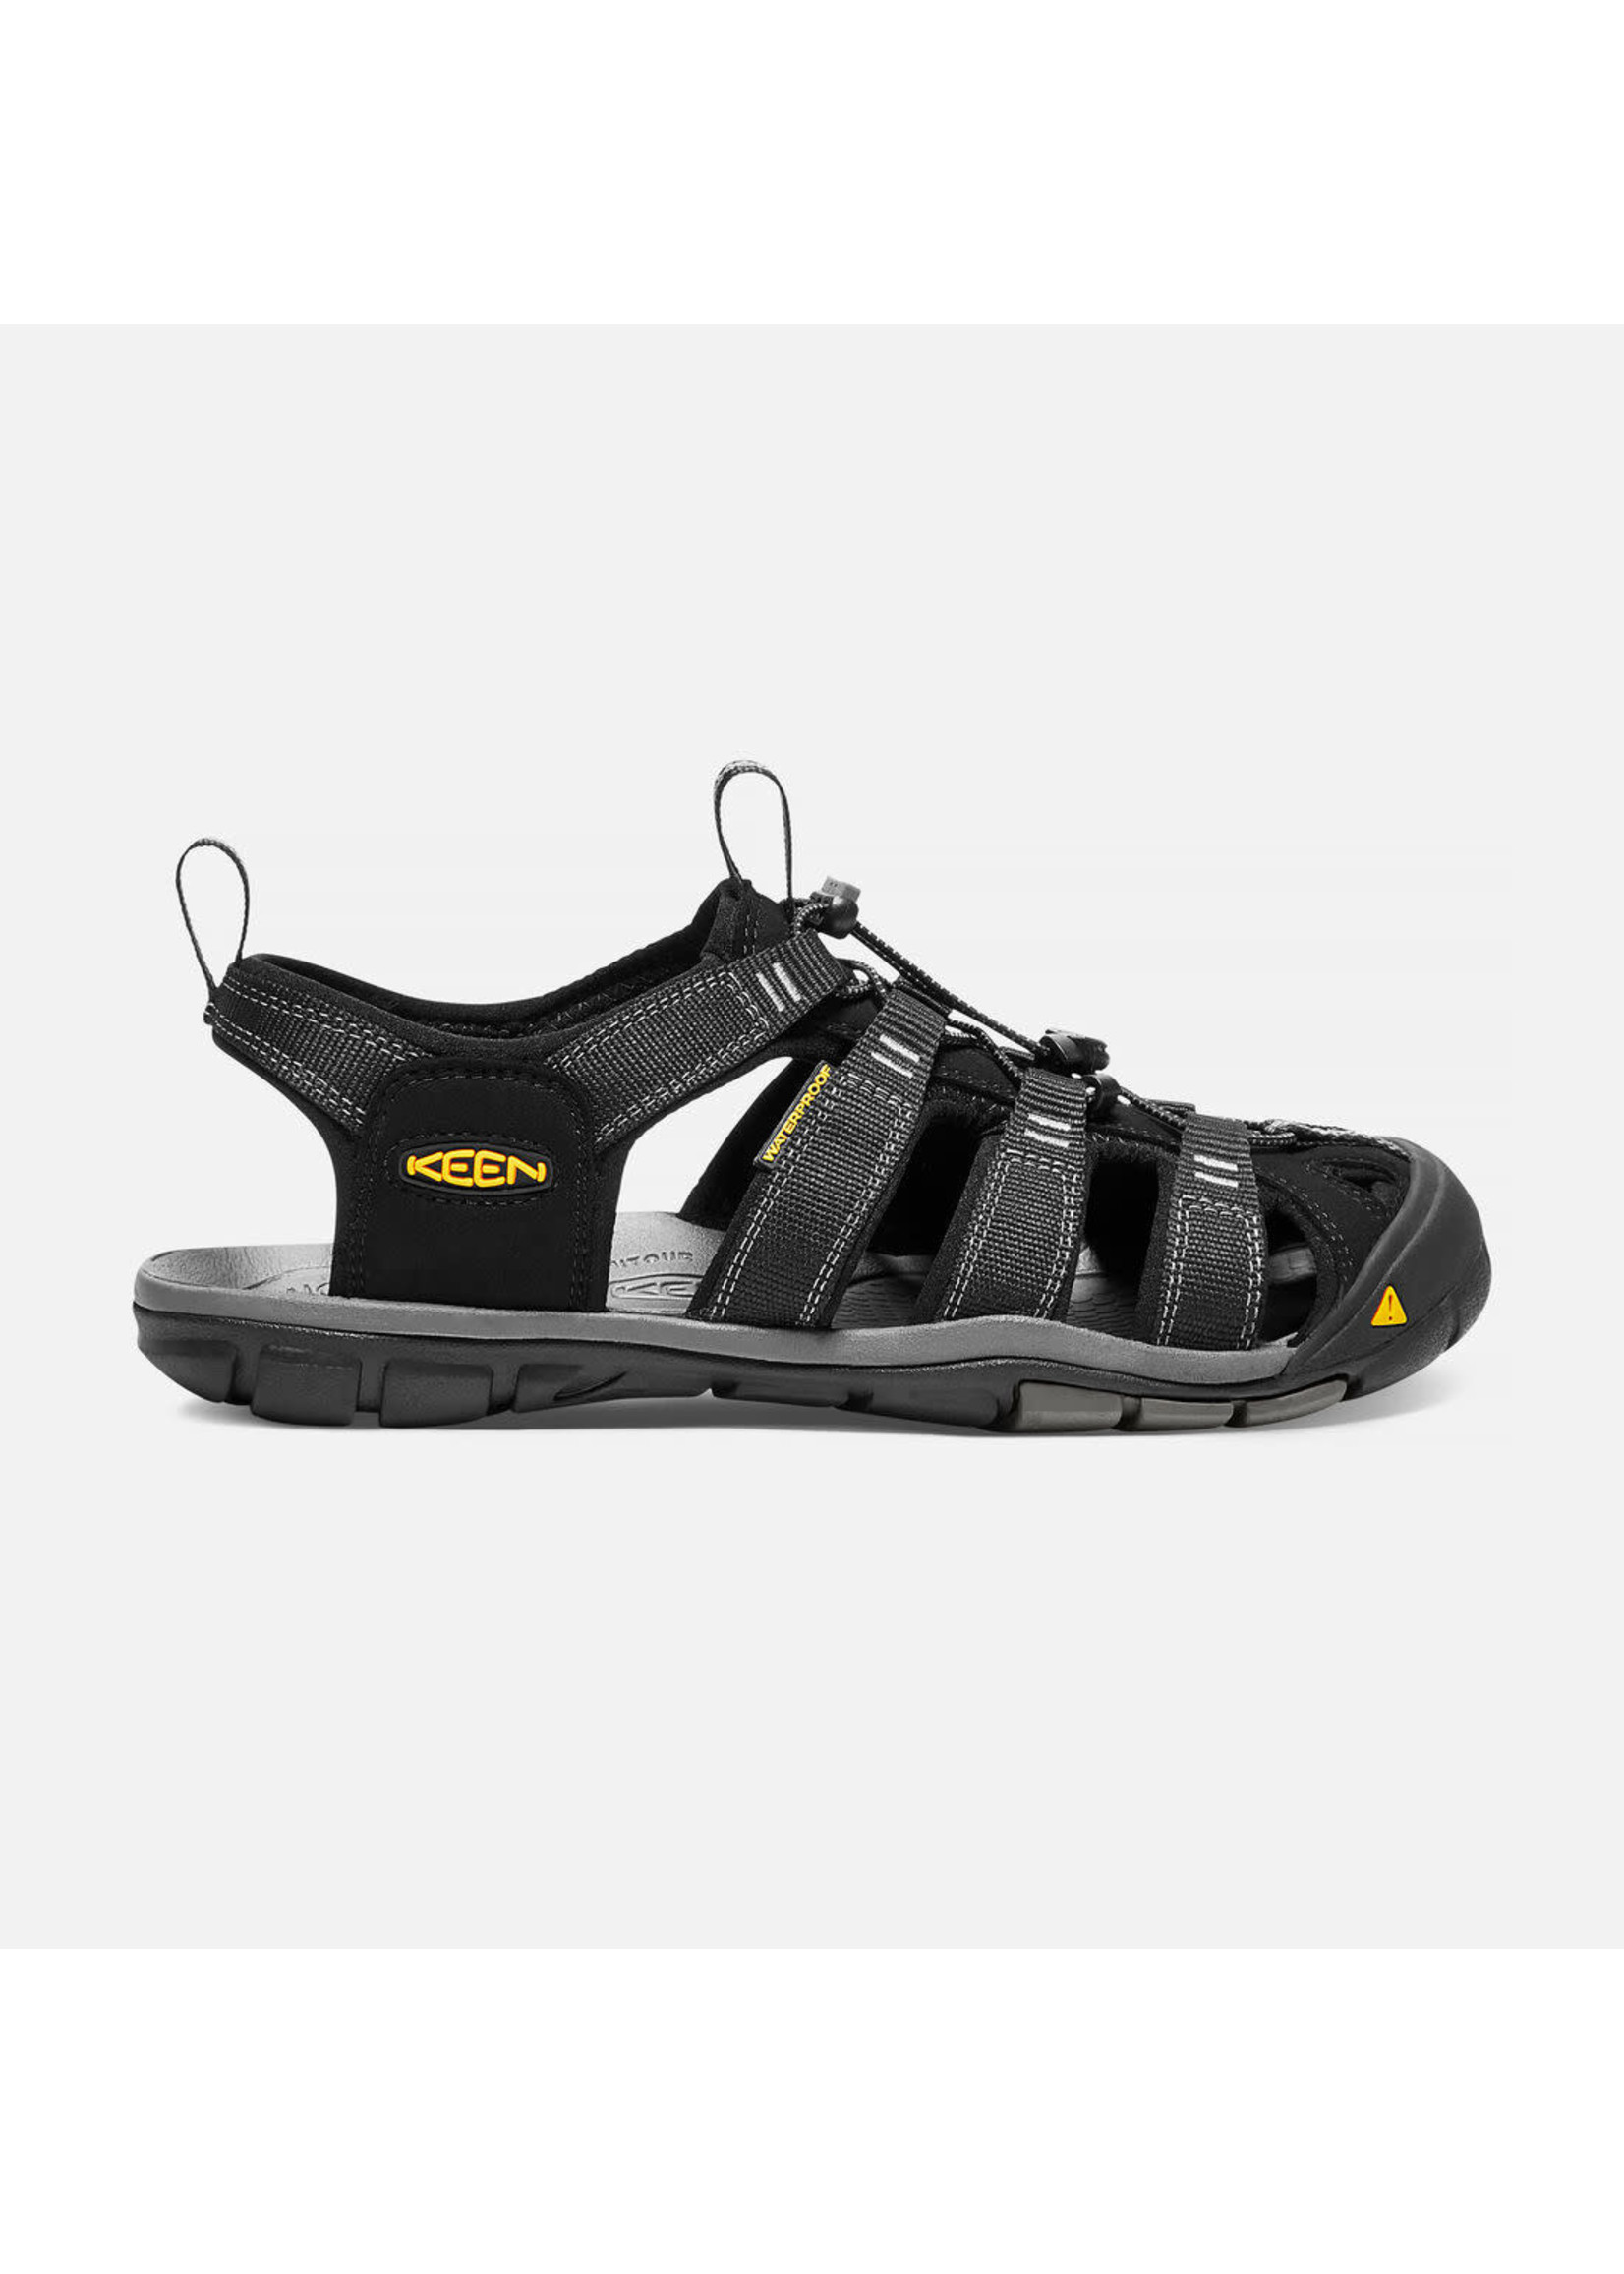 Keen Sandales Clearwater CNX pour hommes